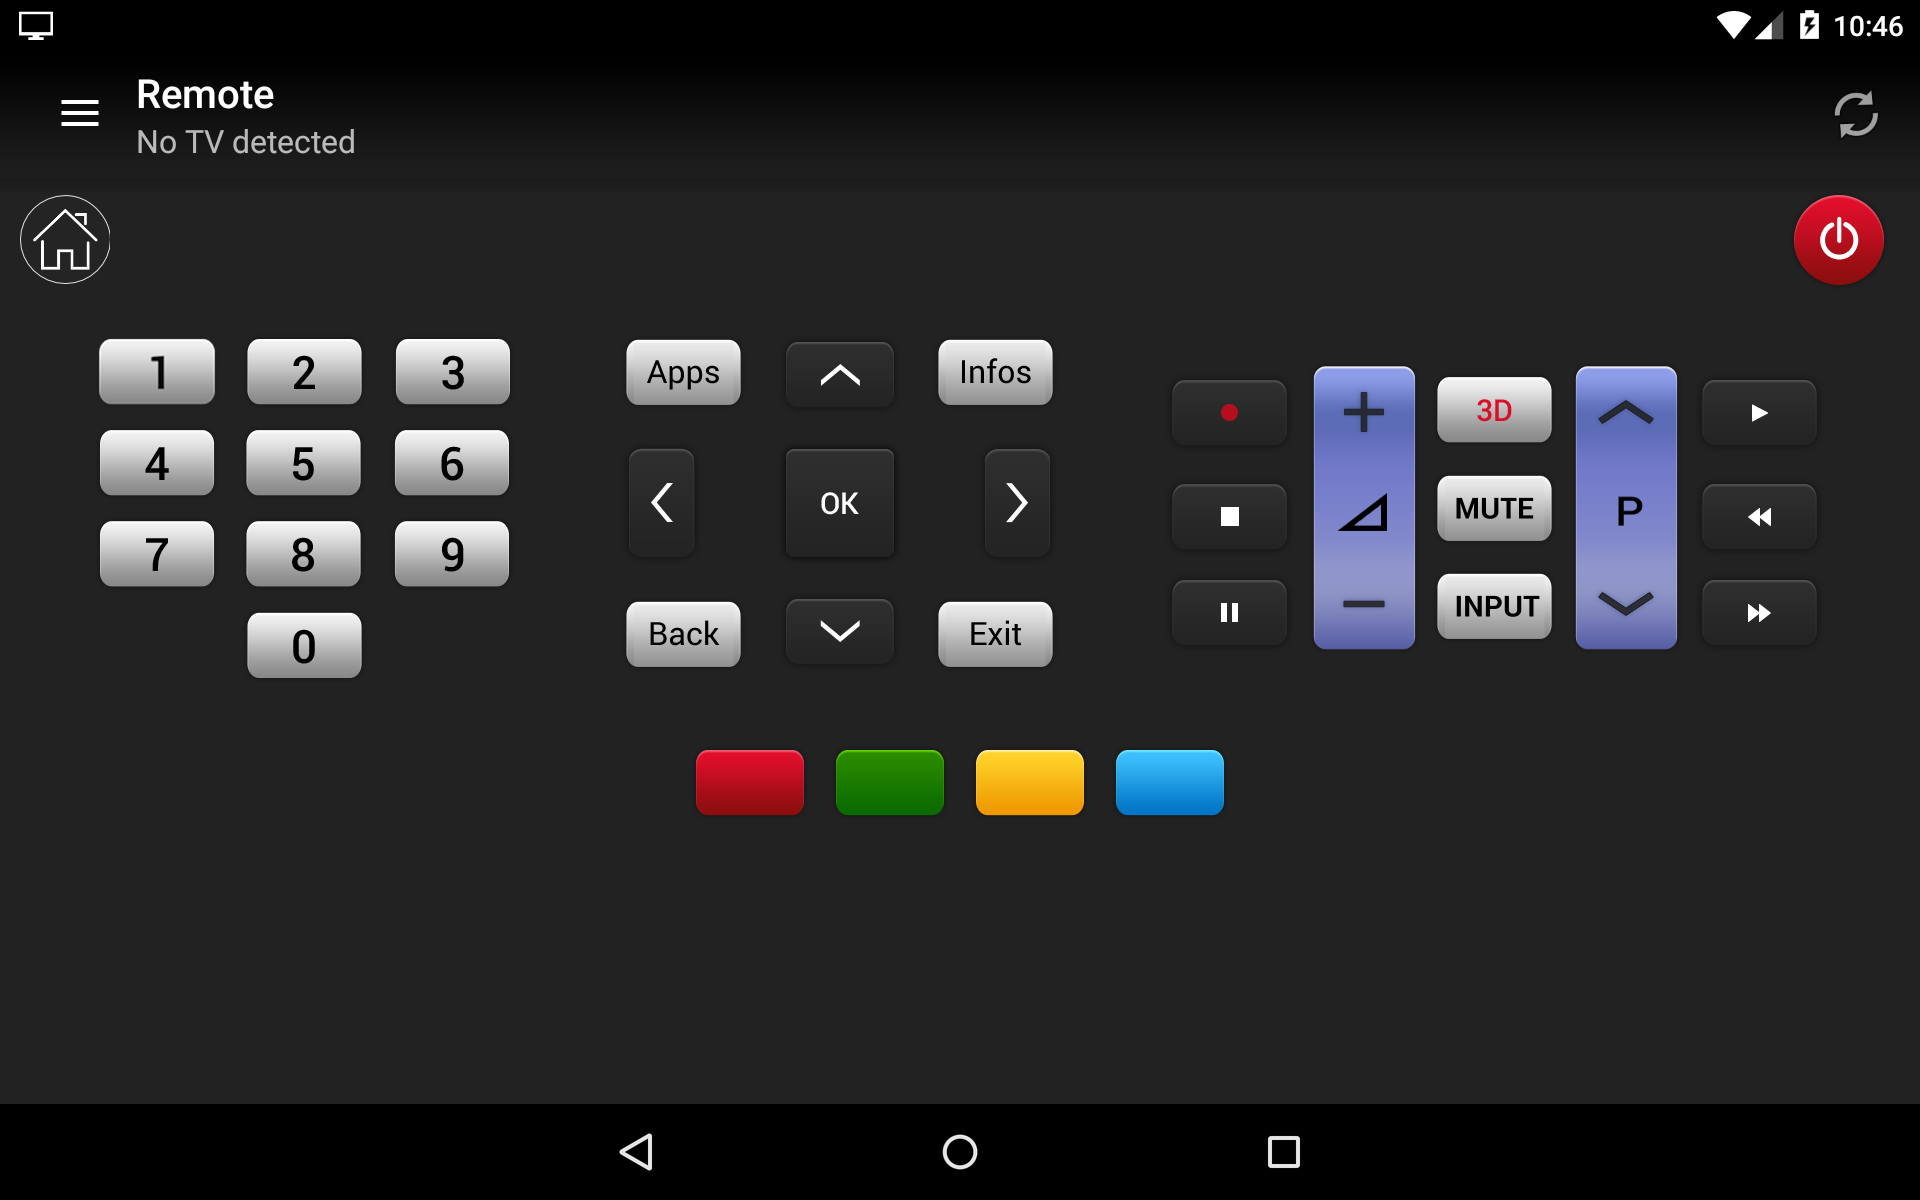 Android application Remote for LG TV screenshort